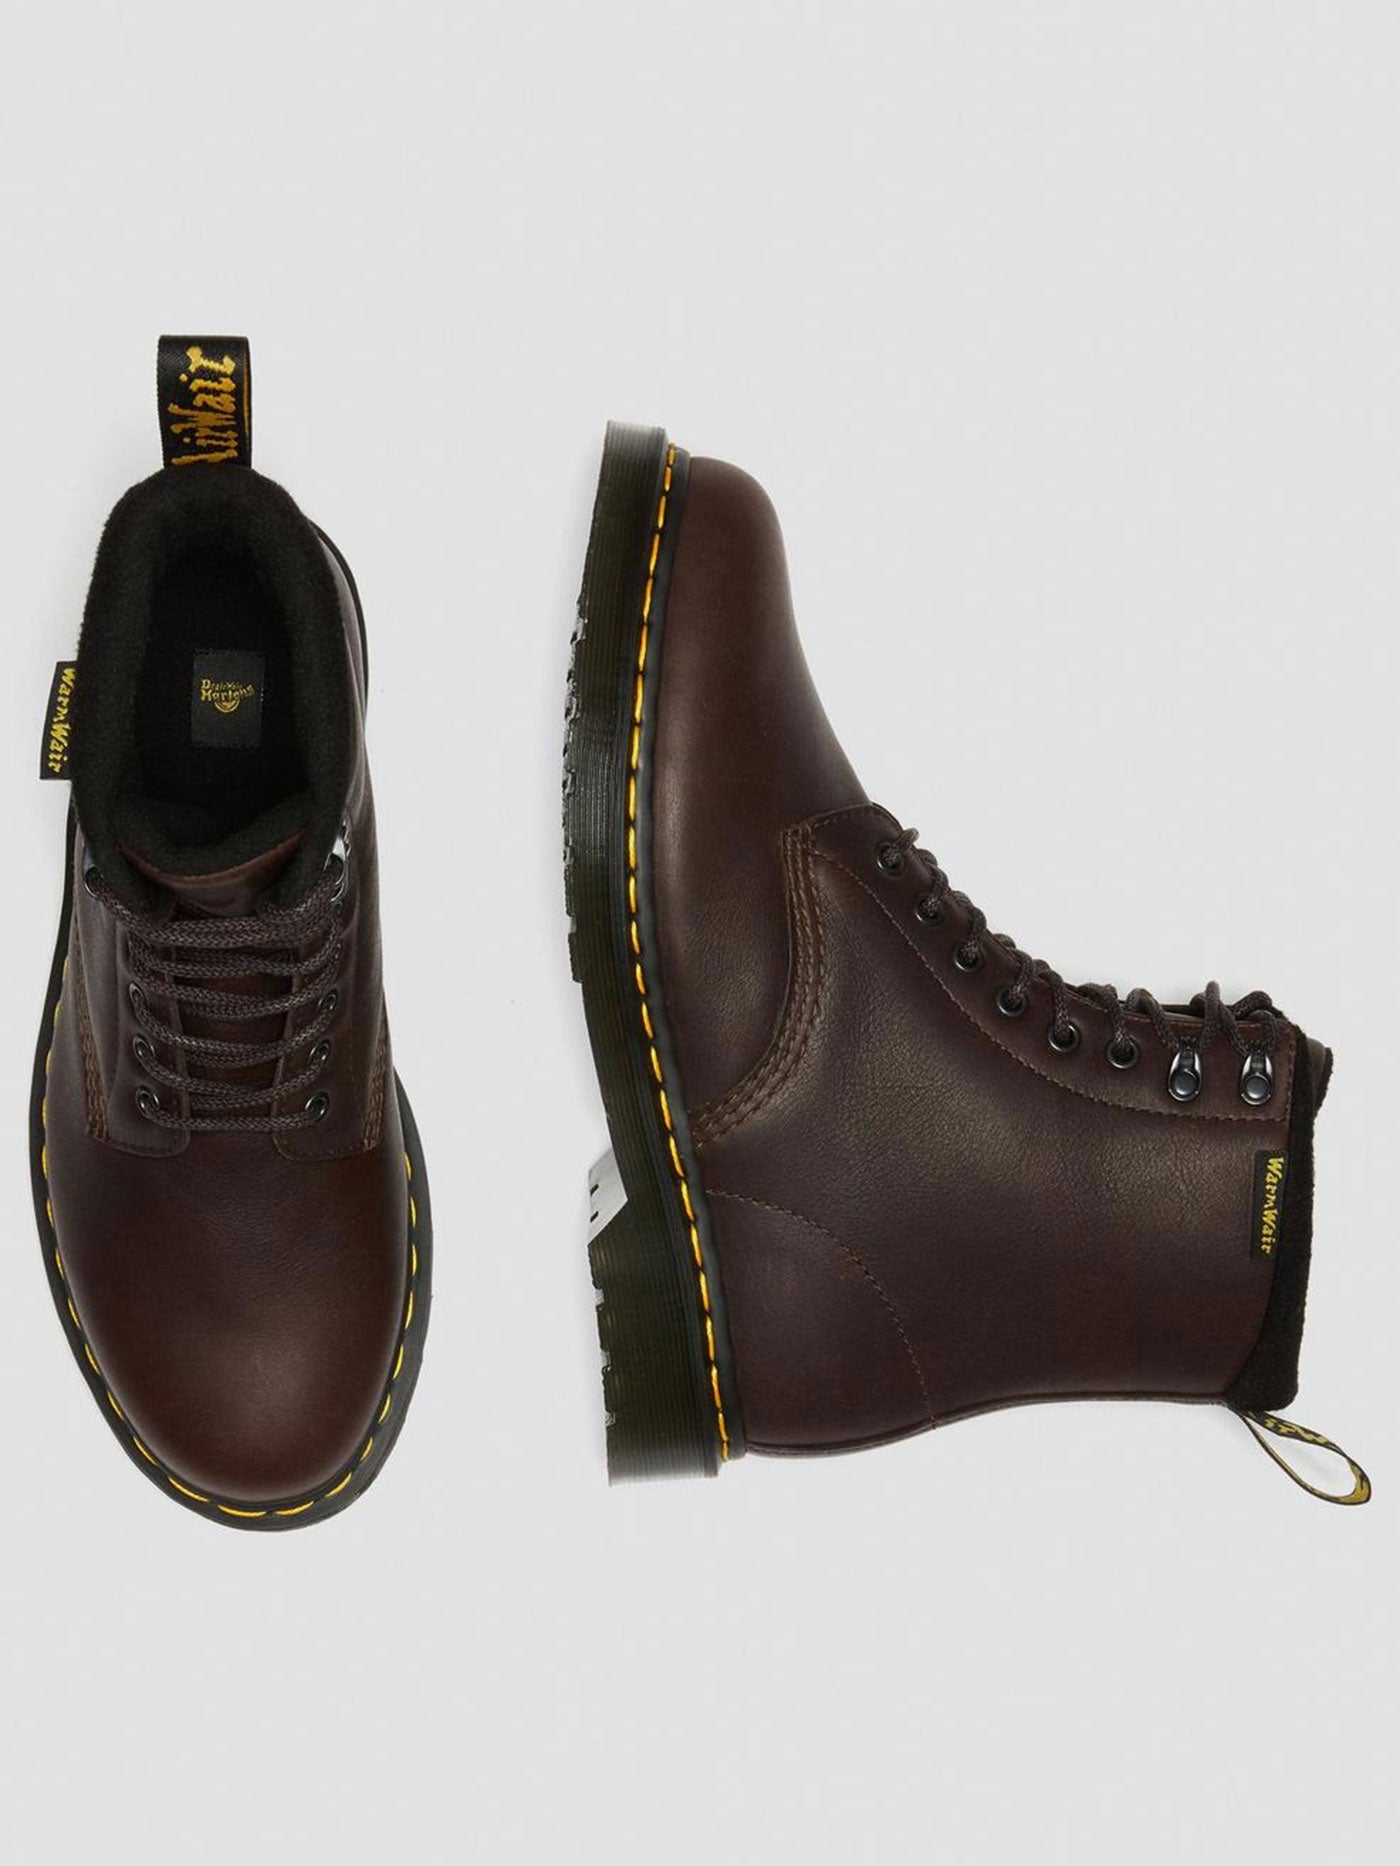 Dr. Martens 1460 Pascal Warmwair Dark Brown Leather Boots | EMPIRE